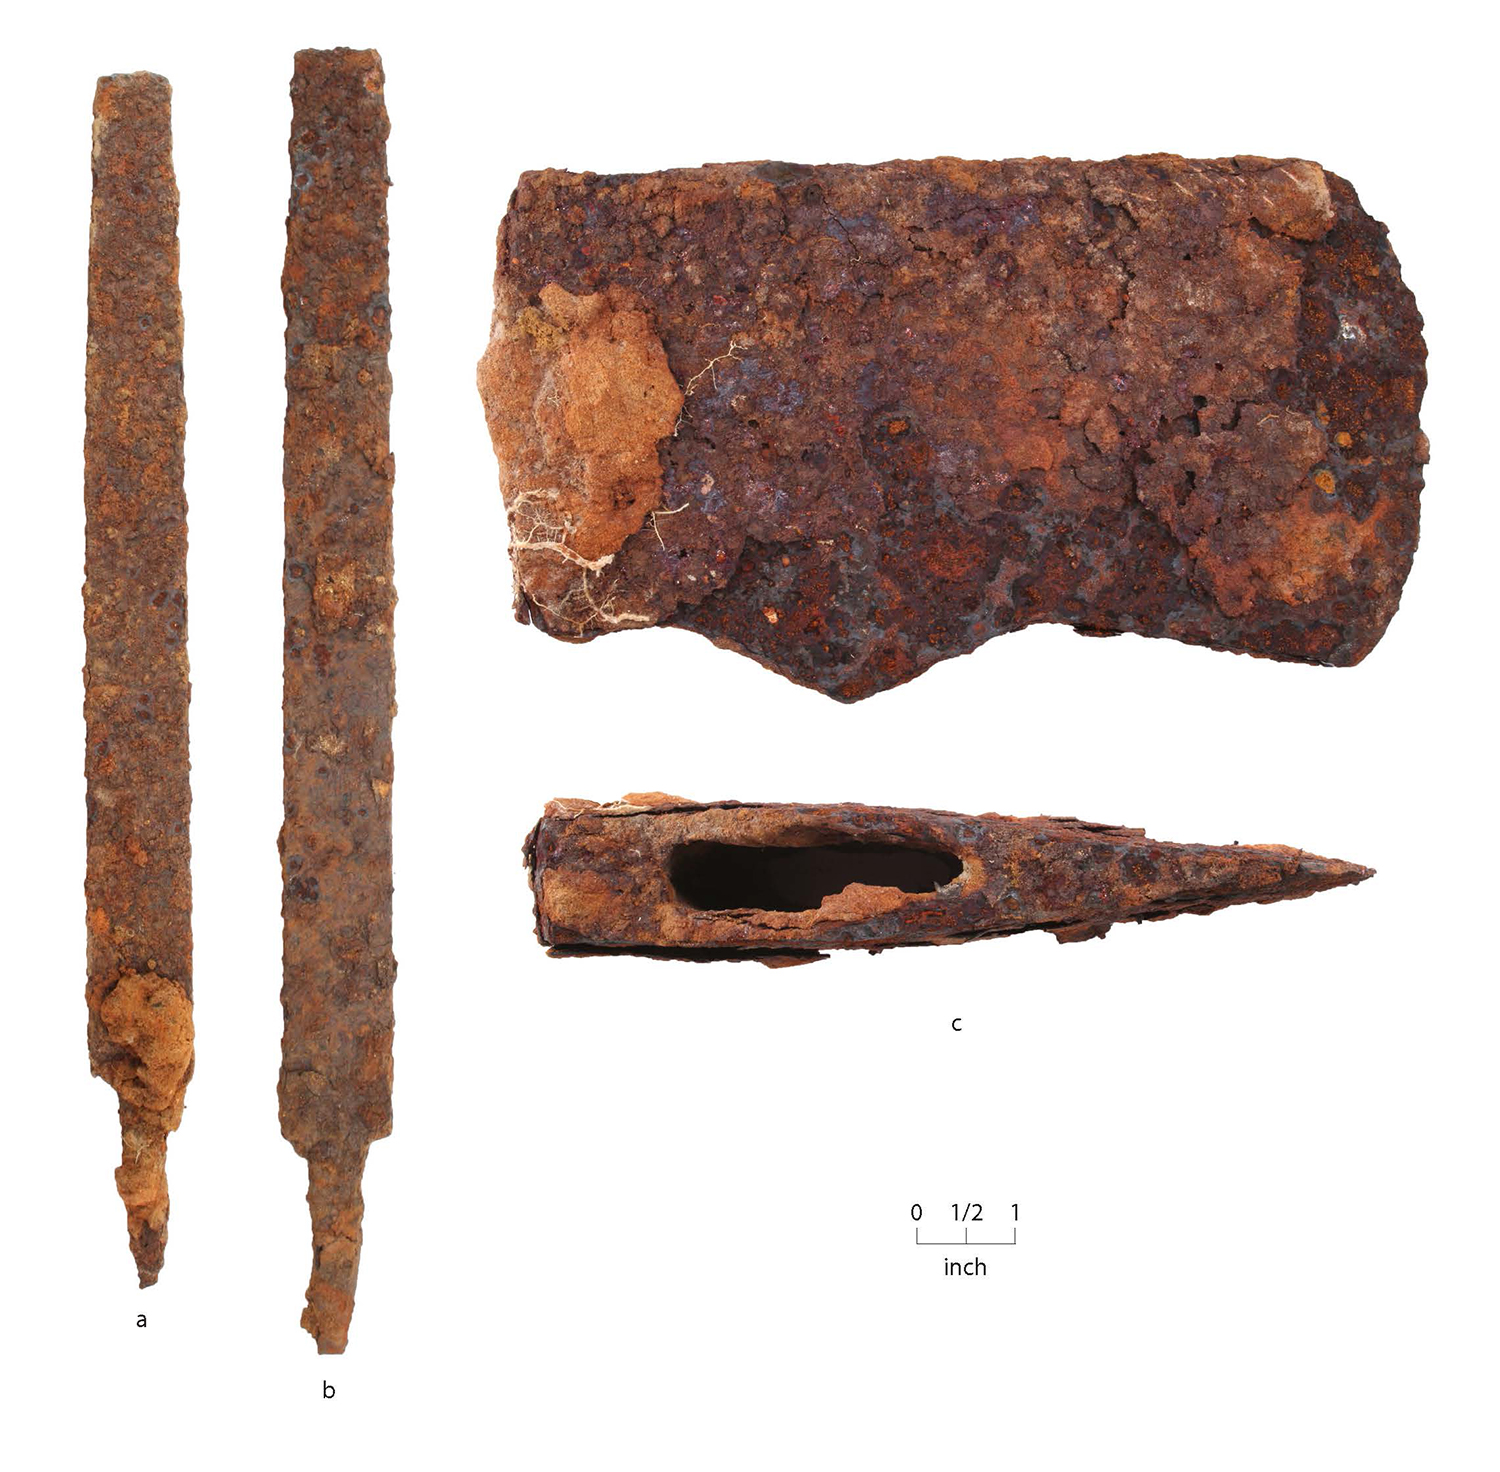 rusted metal tool fragments on a white background with a scale bar.